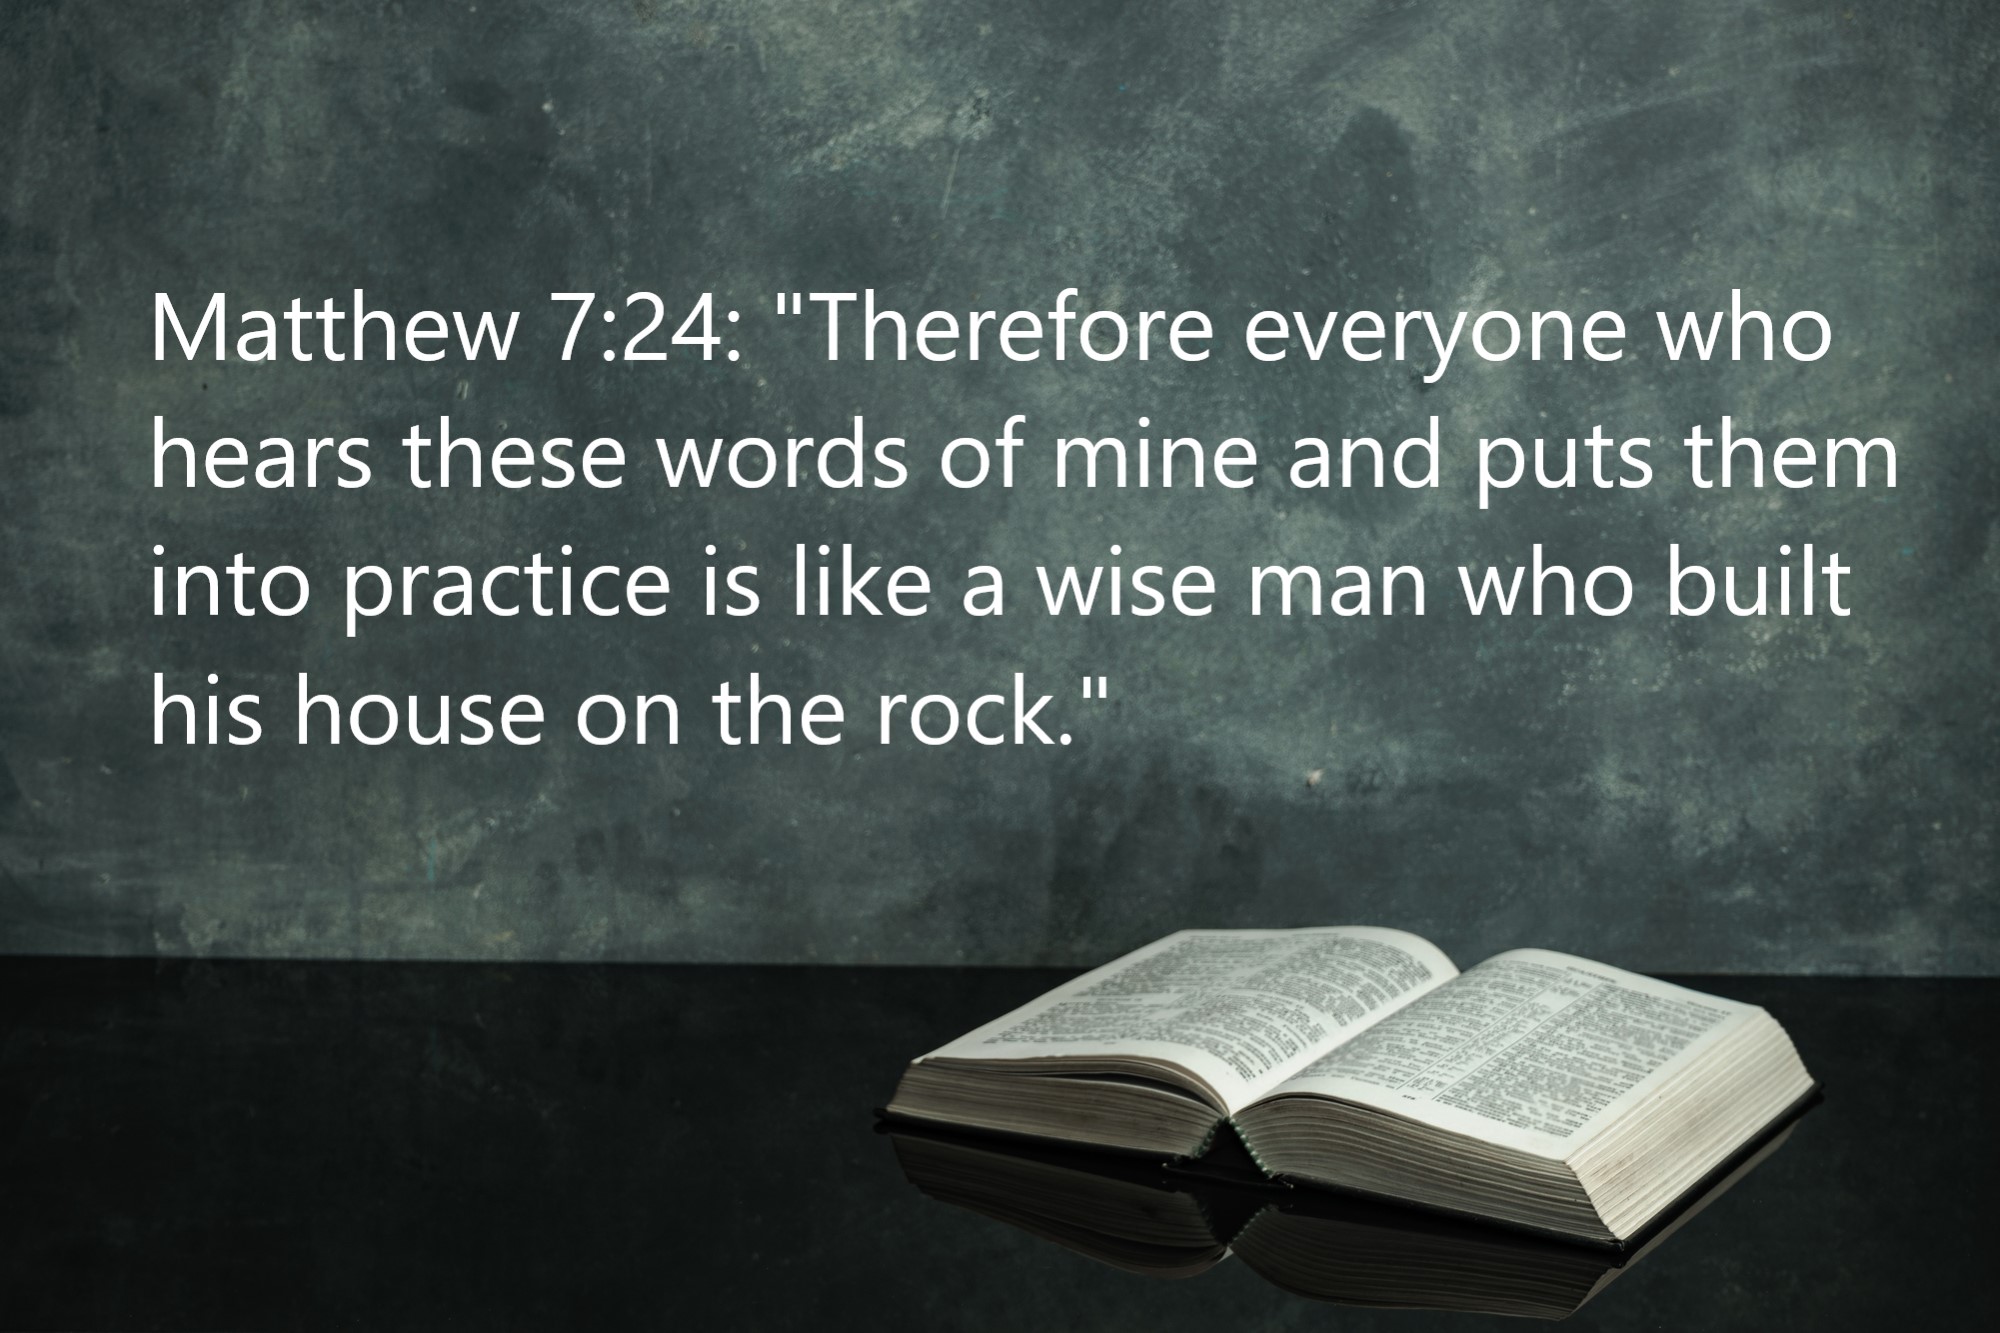 Matthew 7:24: "Therefore everyone who hears these words of mine and puts them into practice is like a wise man who built his house on the rock."